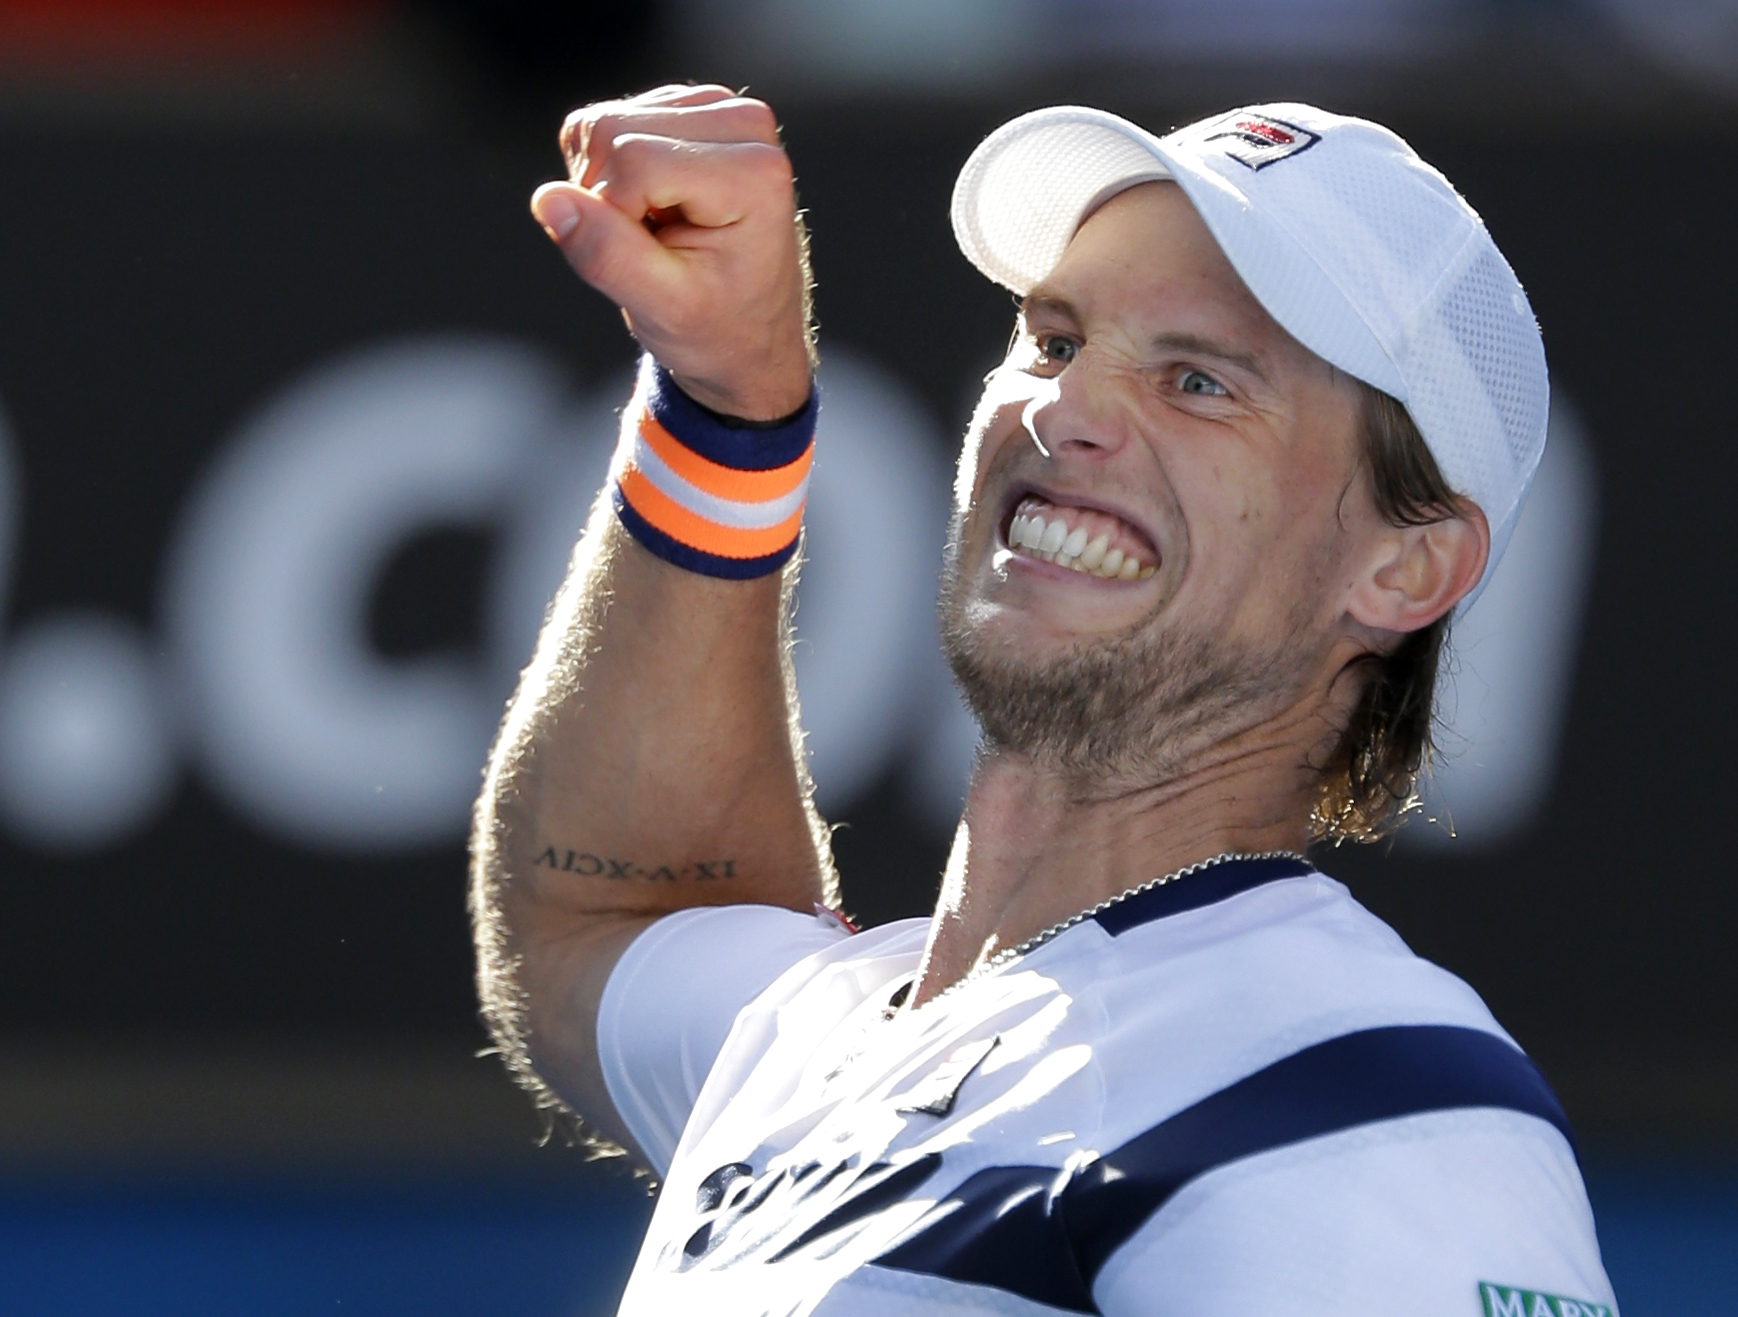 Andreas Seppi VS Janko Tipsarevic ( BETTING TIPS, Match Preview & Expert Analysis )™